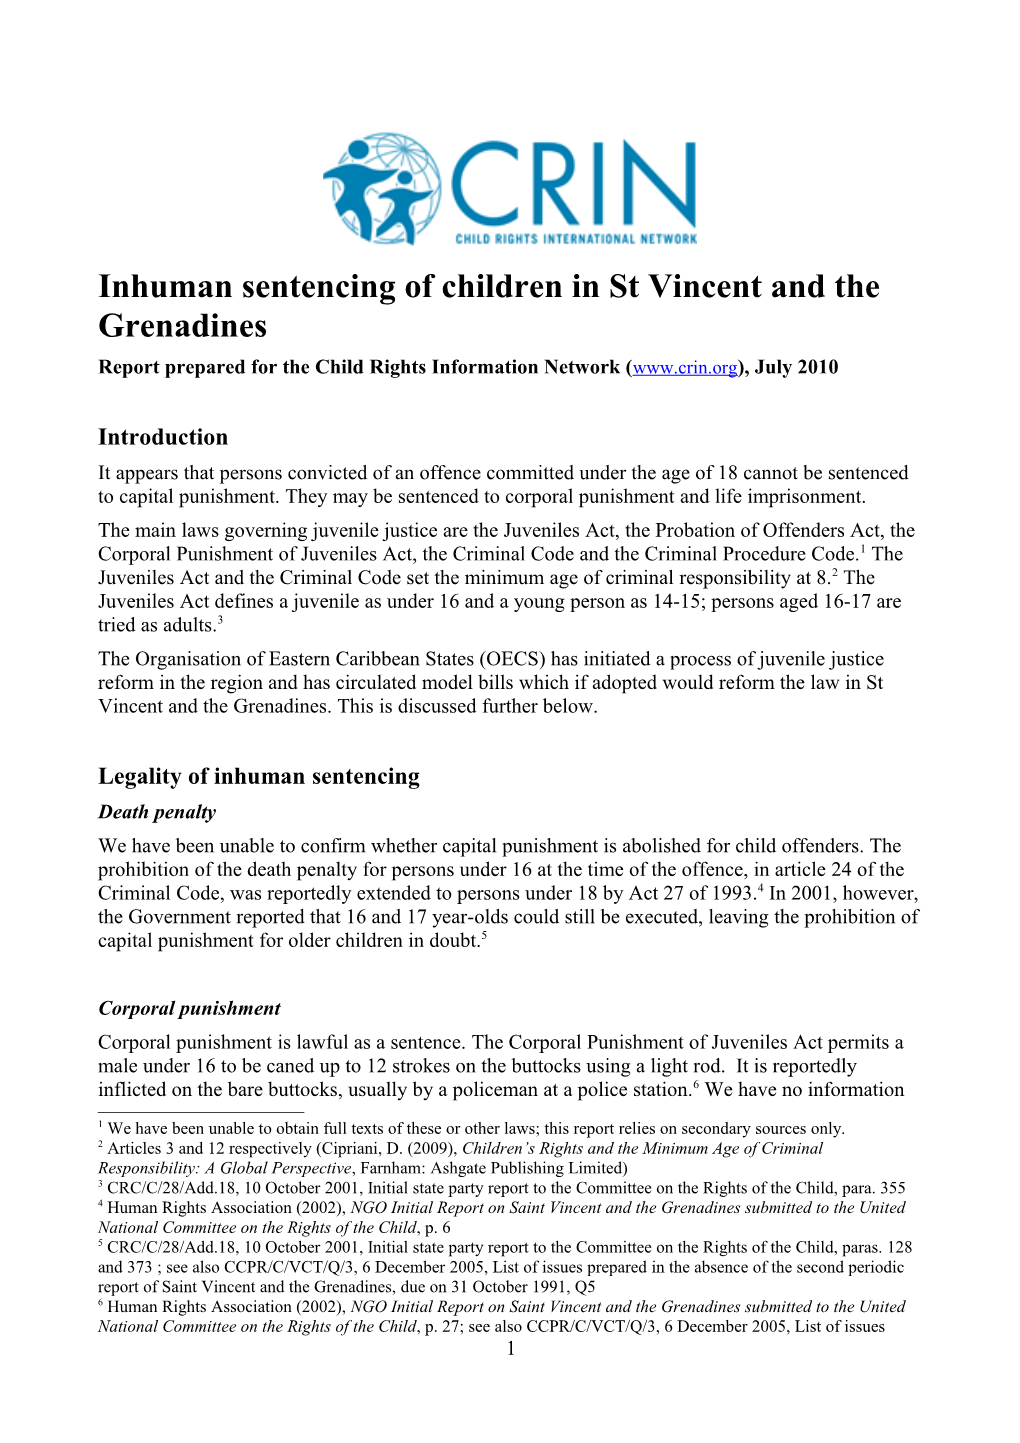 Inhuman Sentencing of Children in St Vincent and the Grenadines